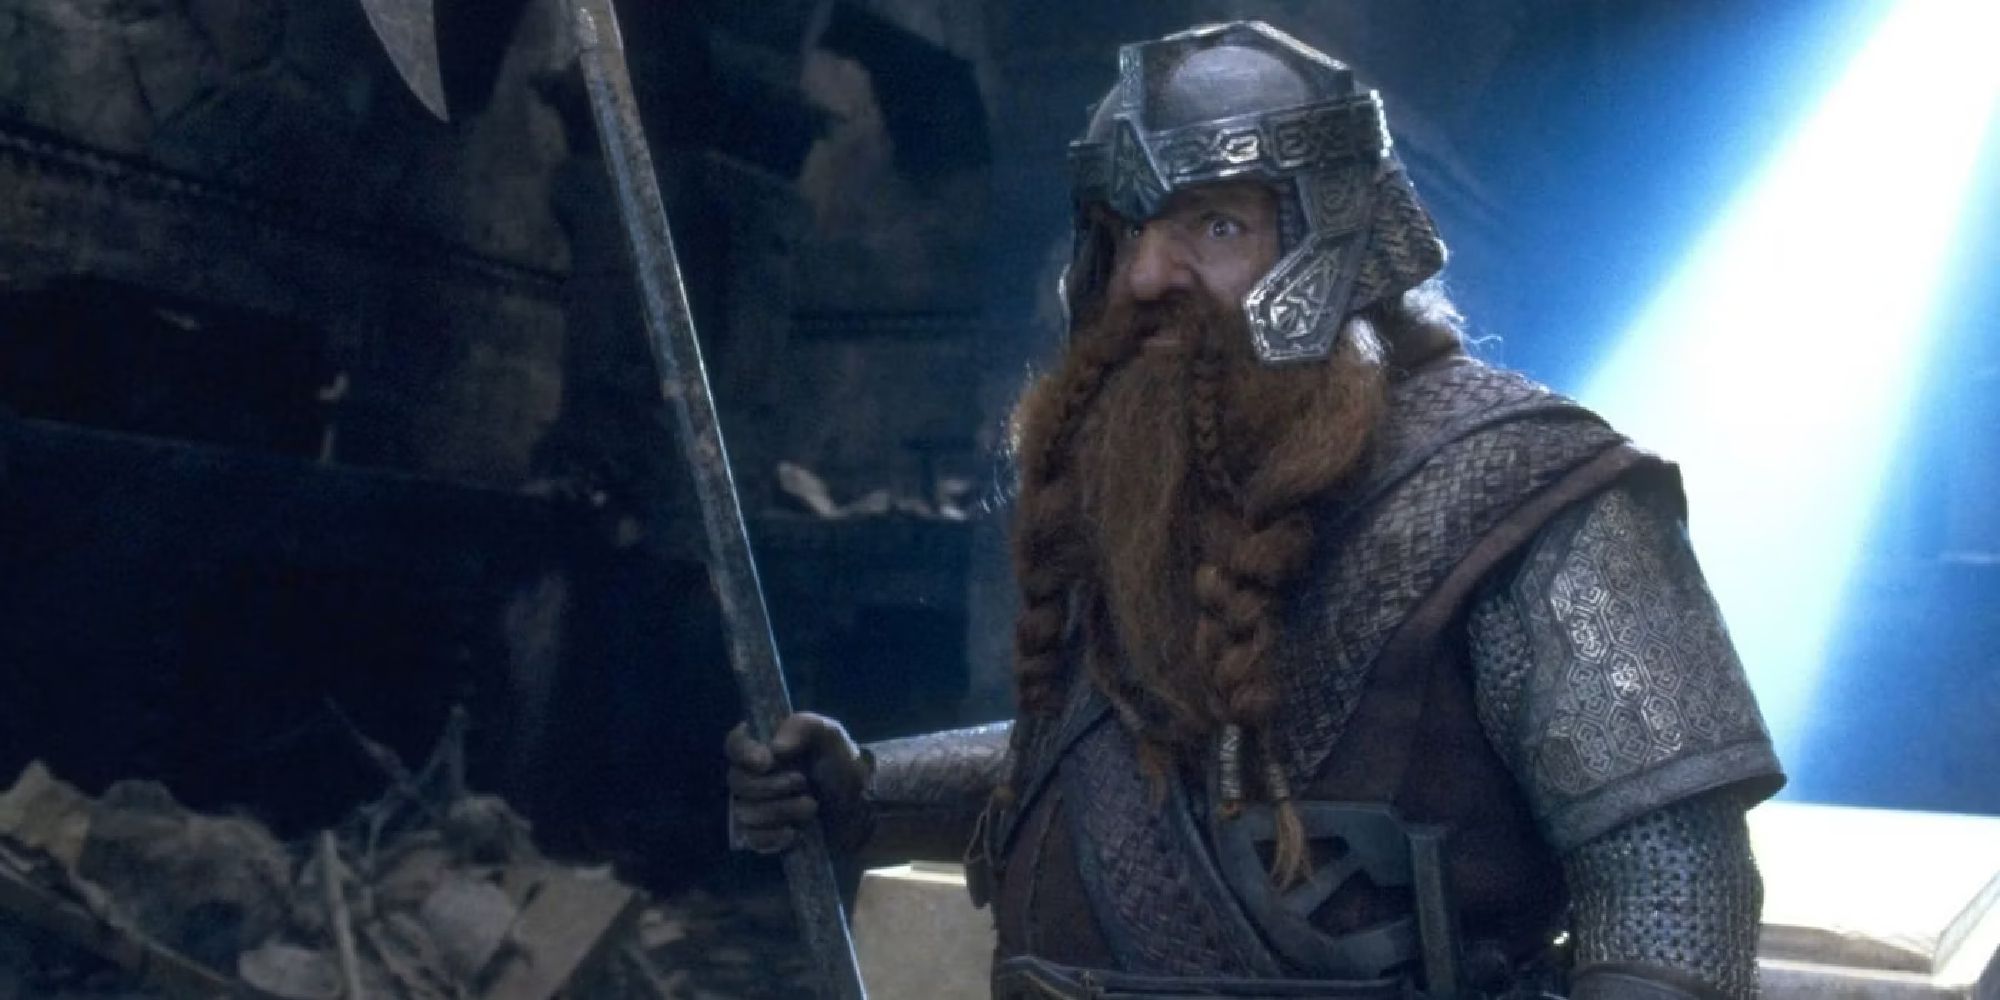 Gimli stands in the Mines of Moira, holding his trusty axe.